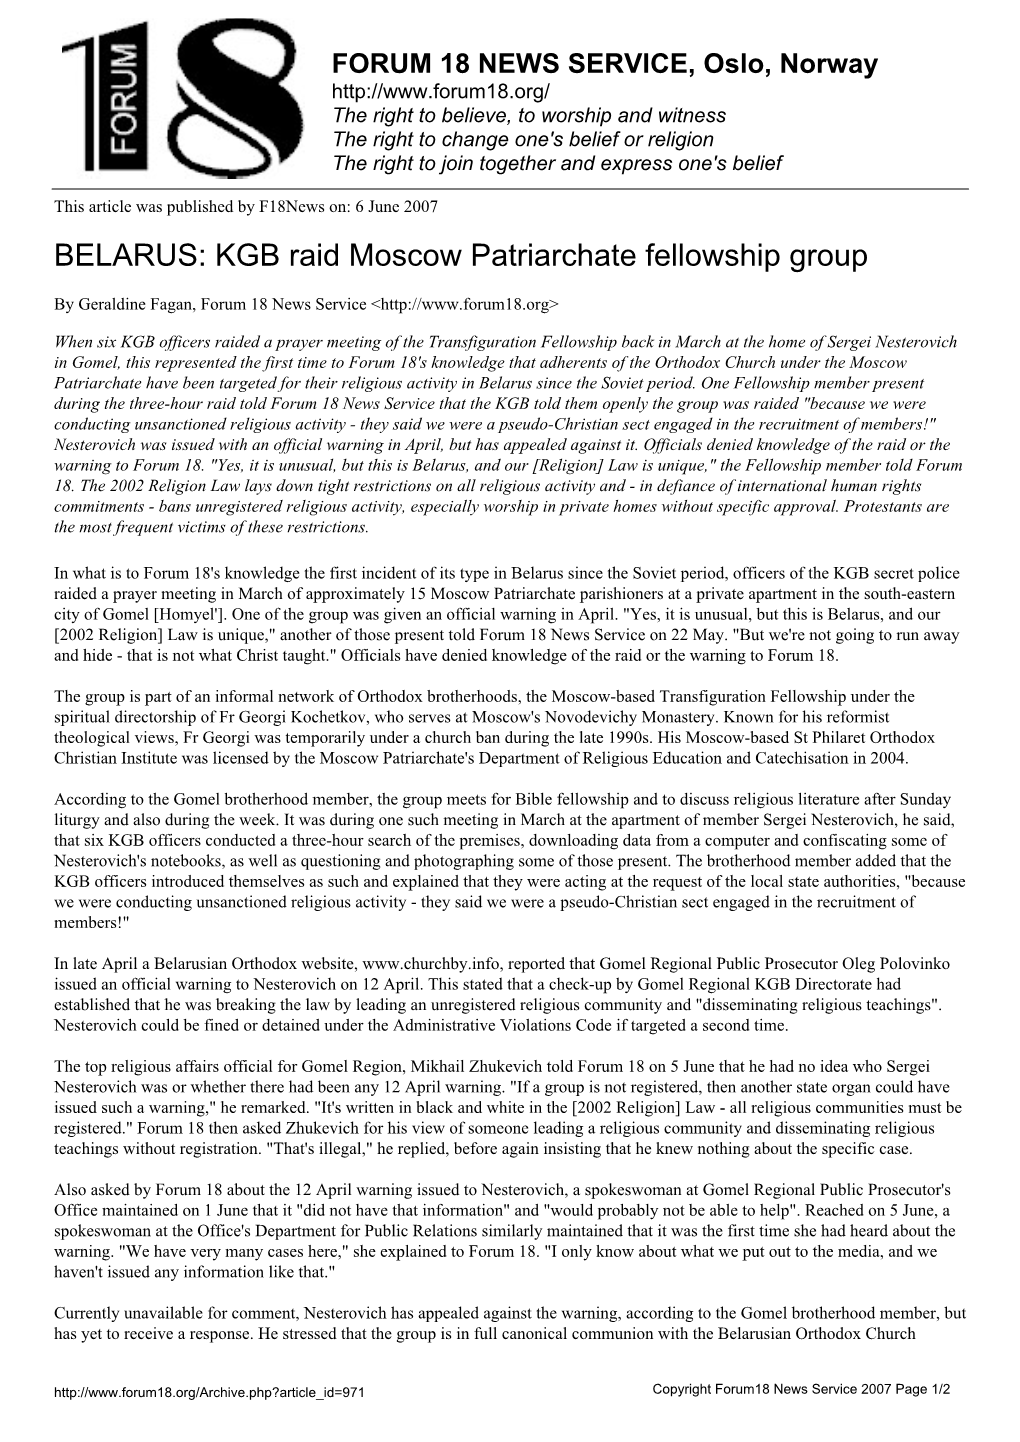 BELARUS: KGB Raid Moscow Patriarchate Fellowship Group